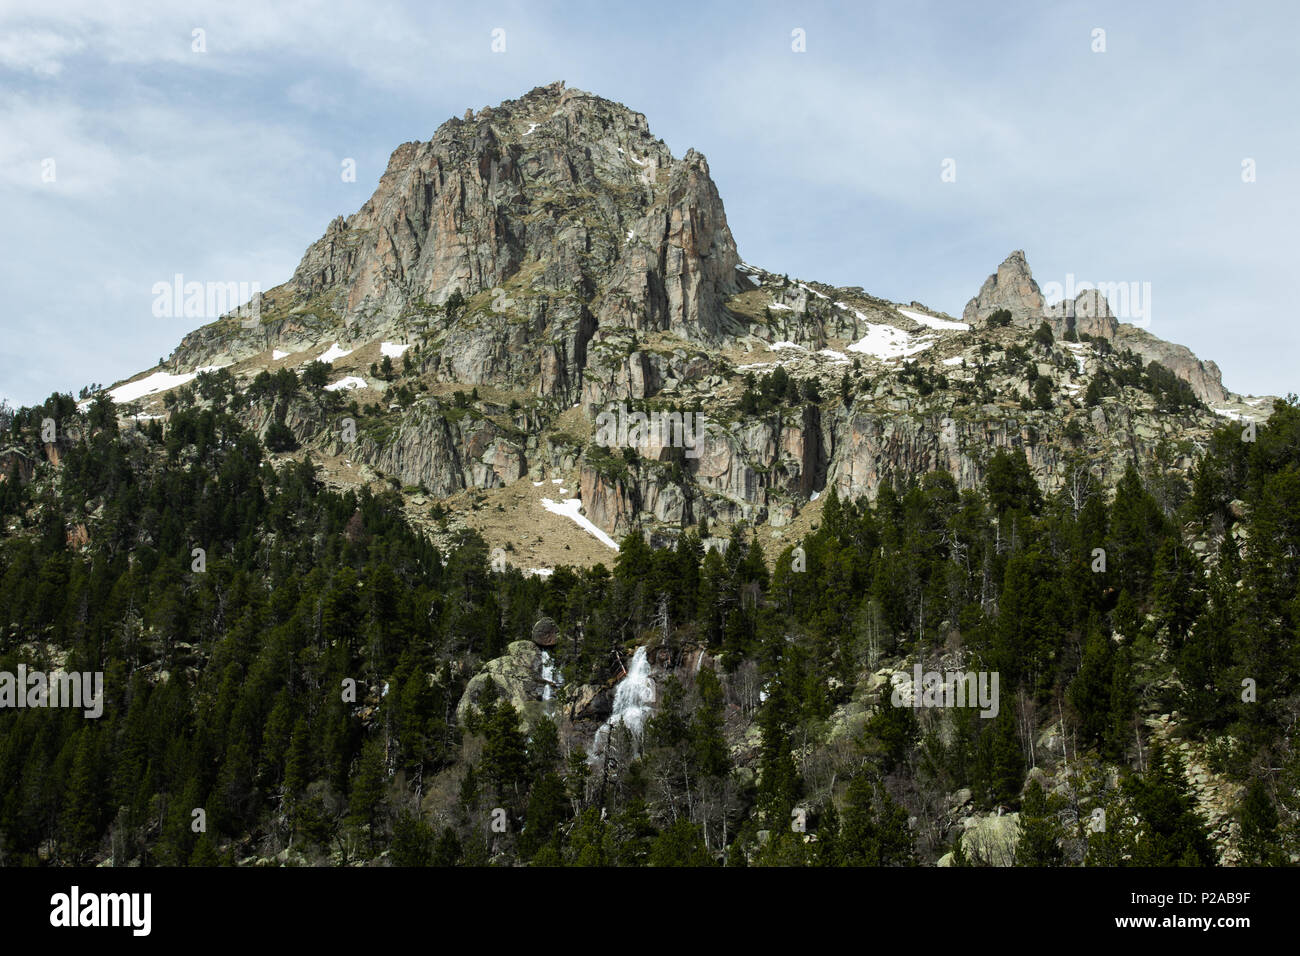 Mountain with black pine forest, Agulles d'Amitges, in Parc Nacional d'Aigüestortes, Catalonia, Spain Stock Photo